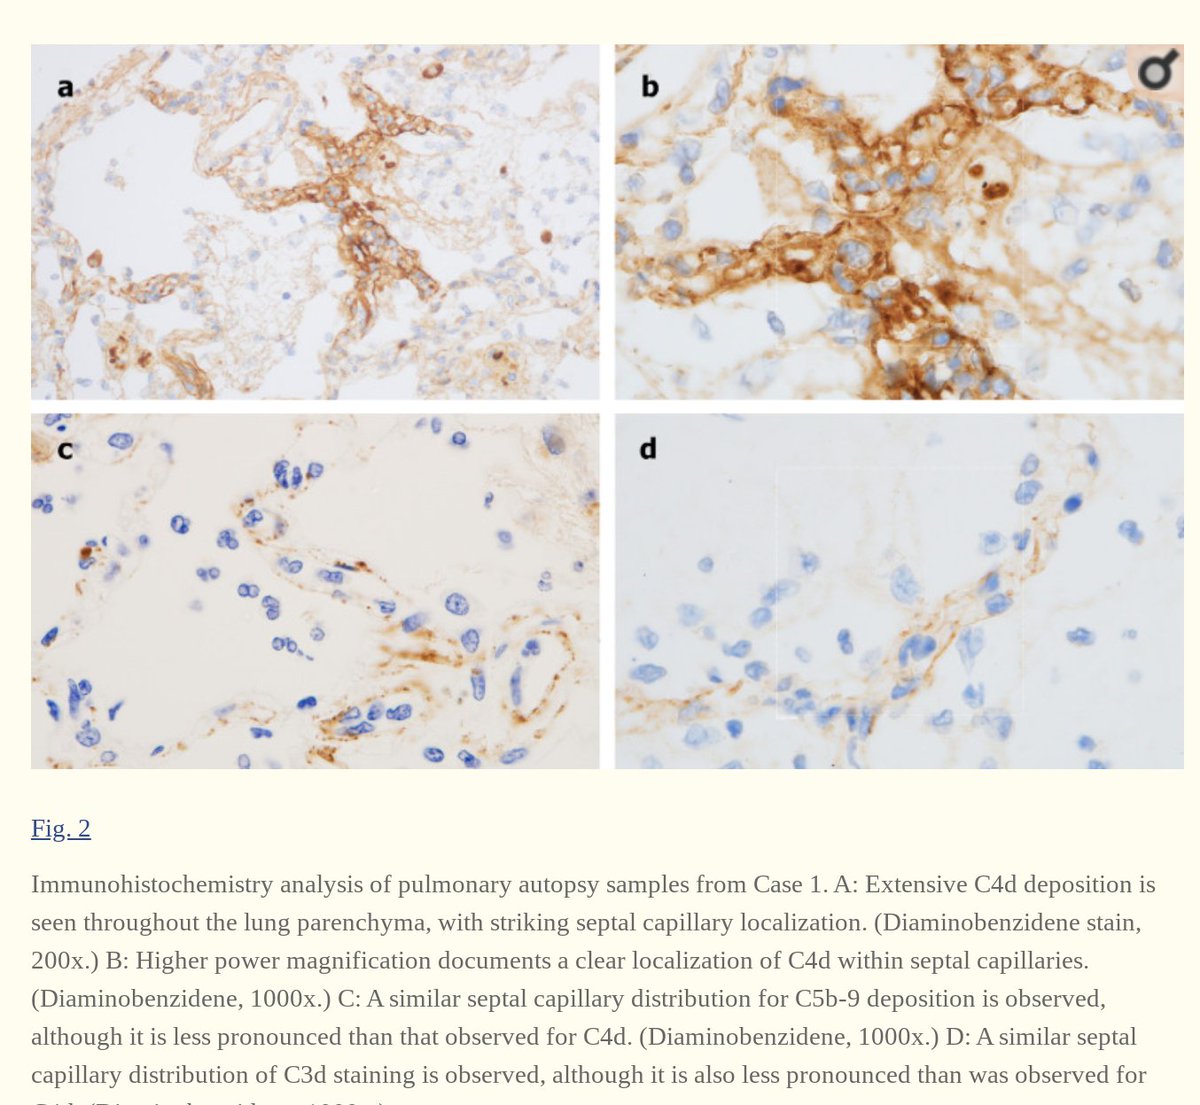 3. Complement deposition, with a striking localization to the capillary beds. Notably, co-localization of SARS-CoV-2 envelope proteins has been seen with complement components in dermal tissues and pulmonary microvessels.